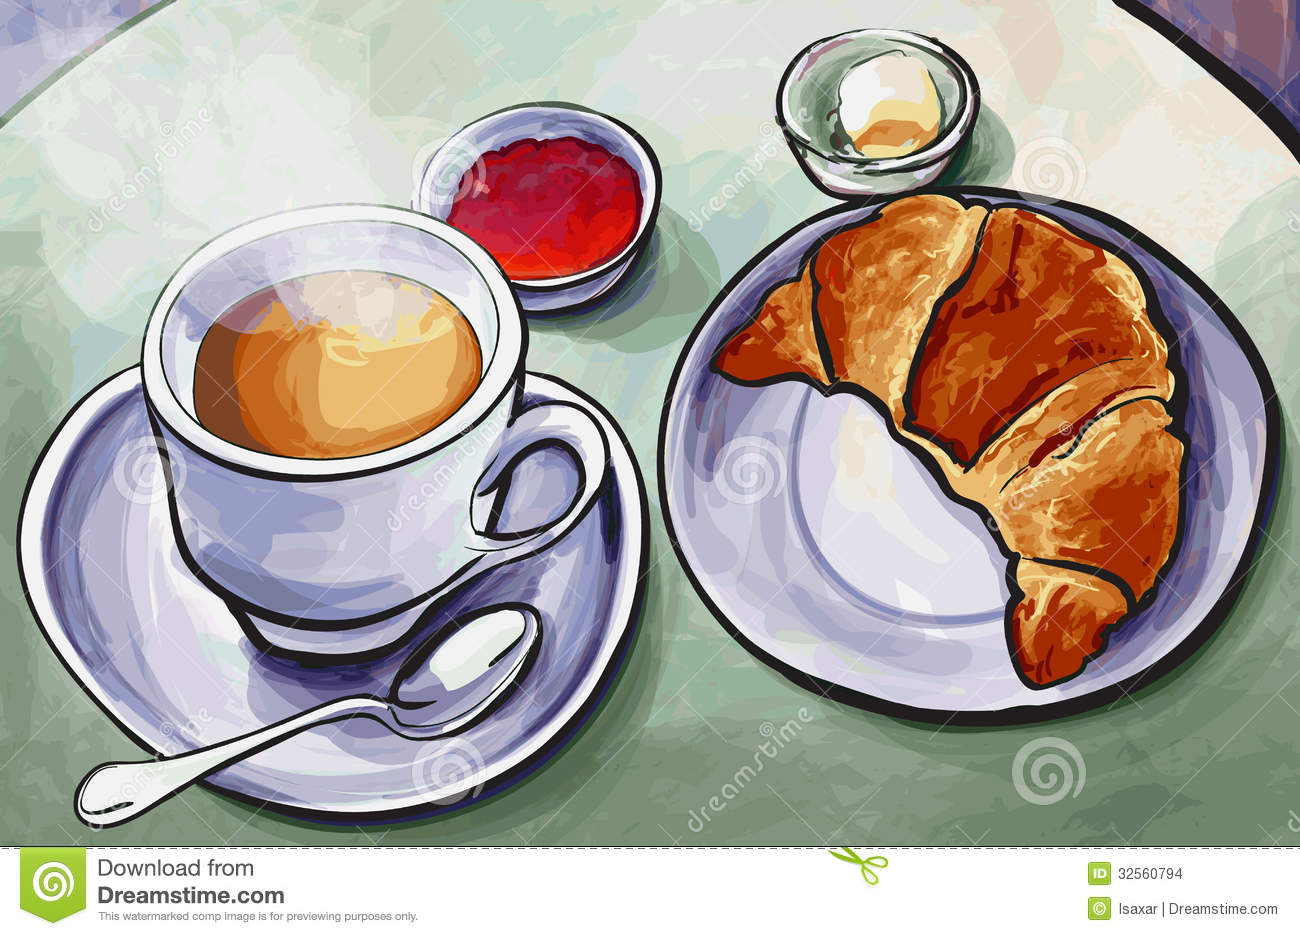 Continental Breakfast Clipart Croissant Breakfast Stock Image   Image